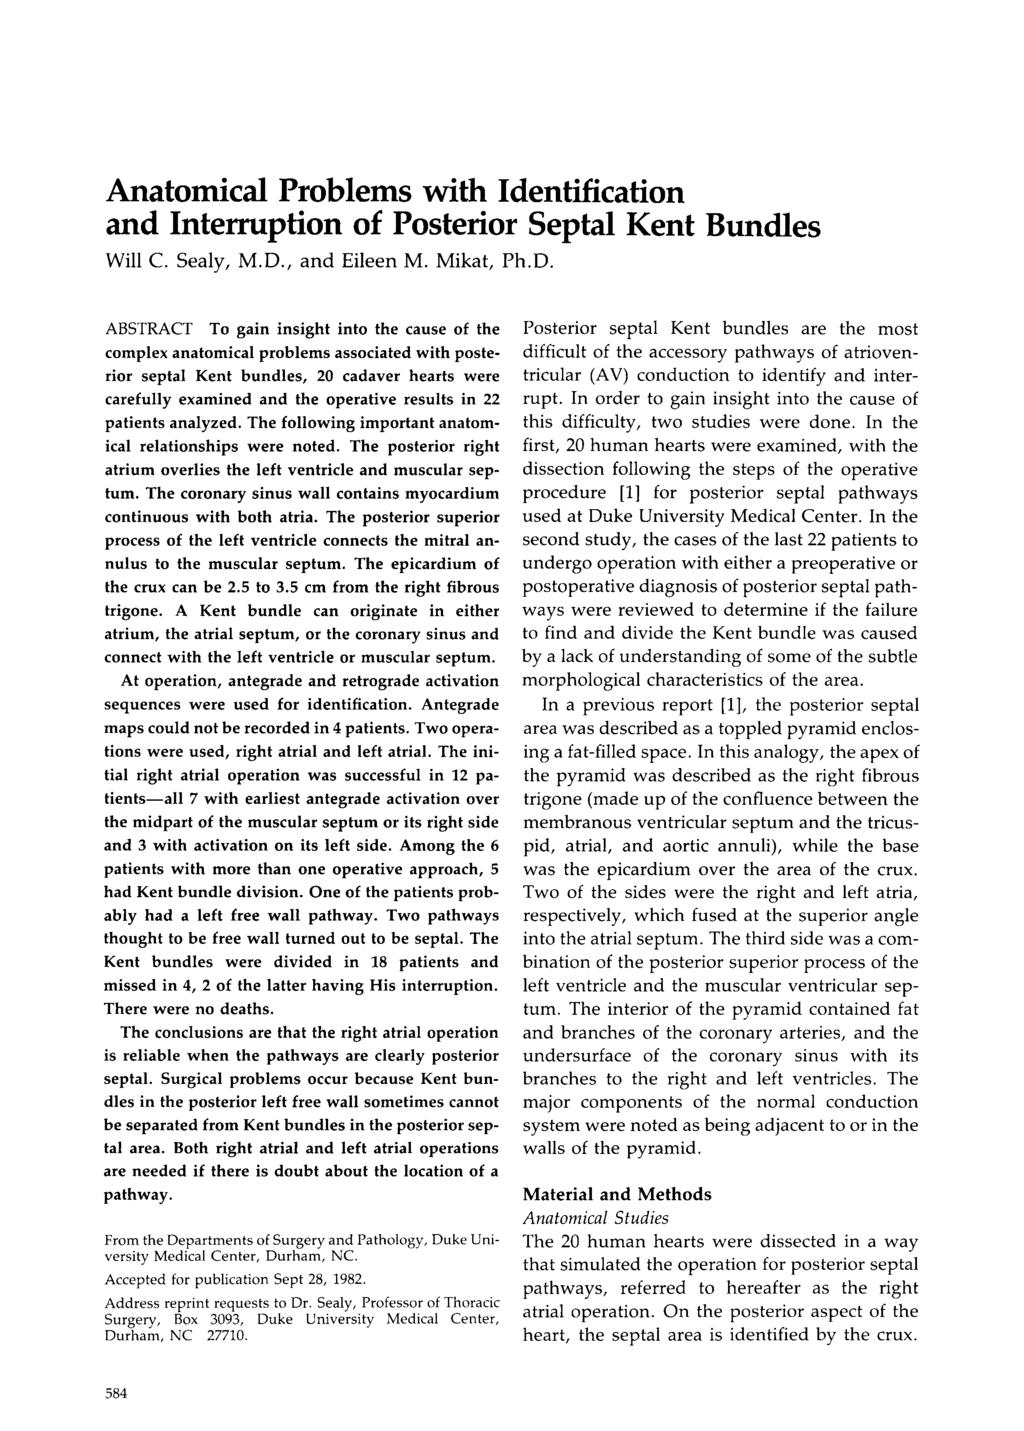 Anatomical Problems with Identification and Interruption of Posterior Septa1 Kent Bundles Will C. Sealy, M.D.